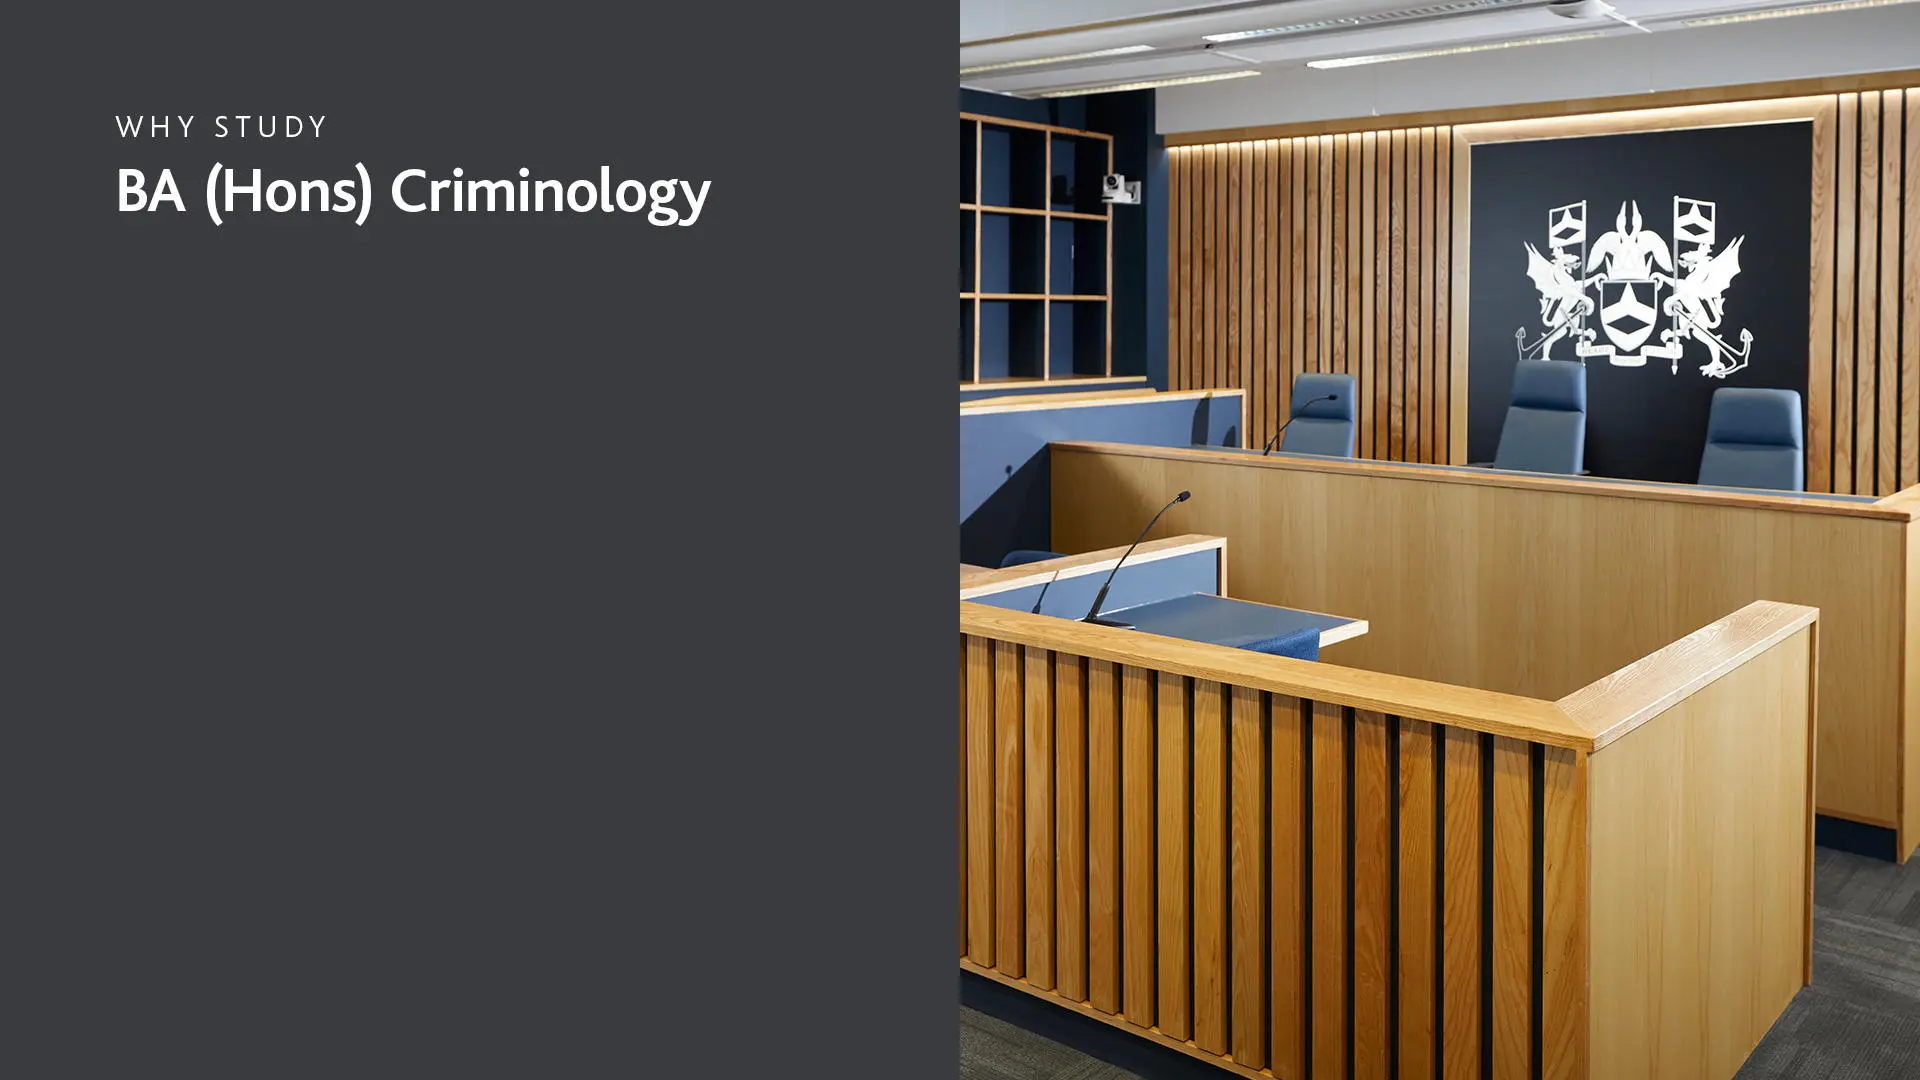 On the left of the screen is a grey rectangle (portrait) with white copy over the top which reads 'Why study BA (Hons) Criminology'. To the right is a photo of the court room at Solent University.